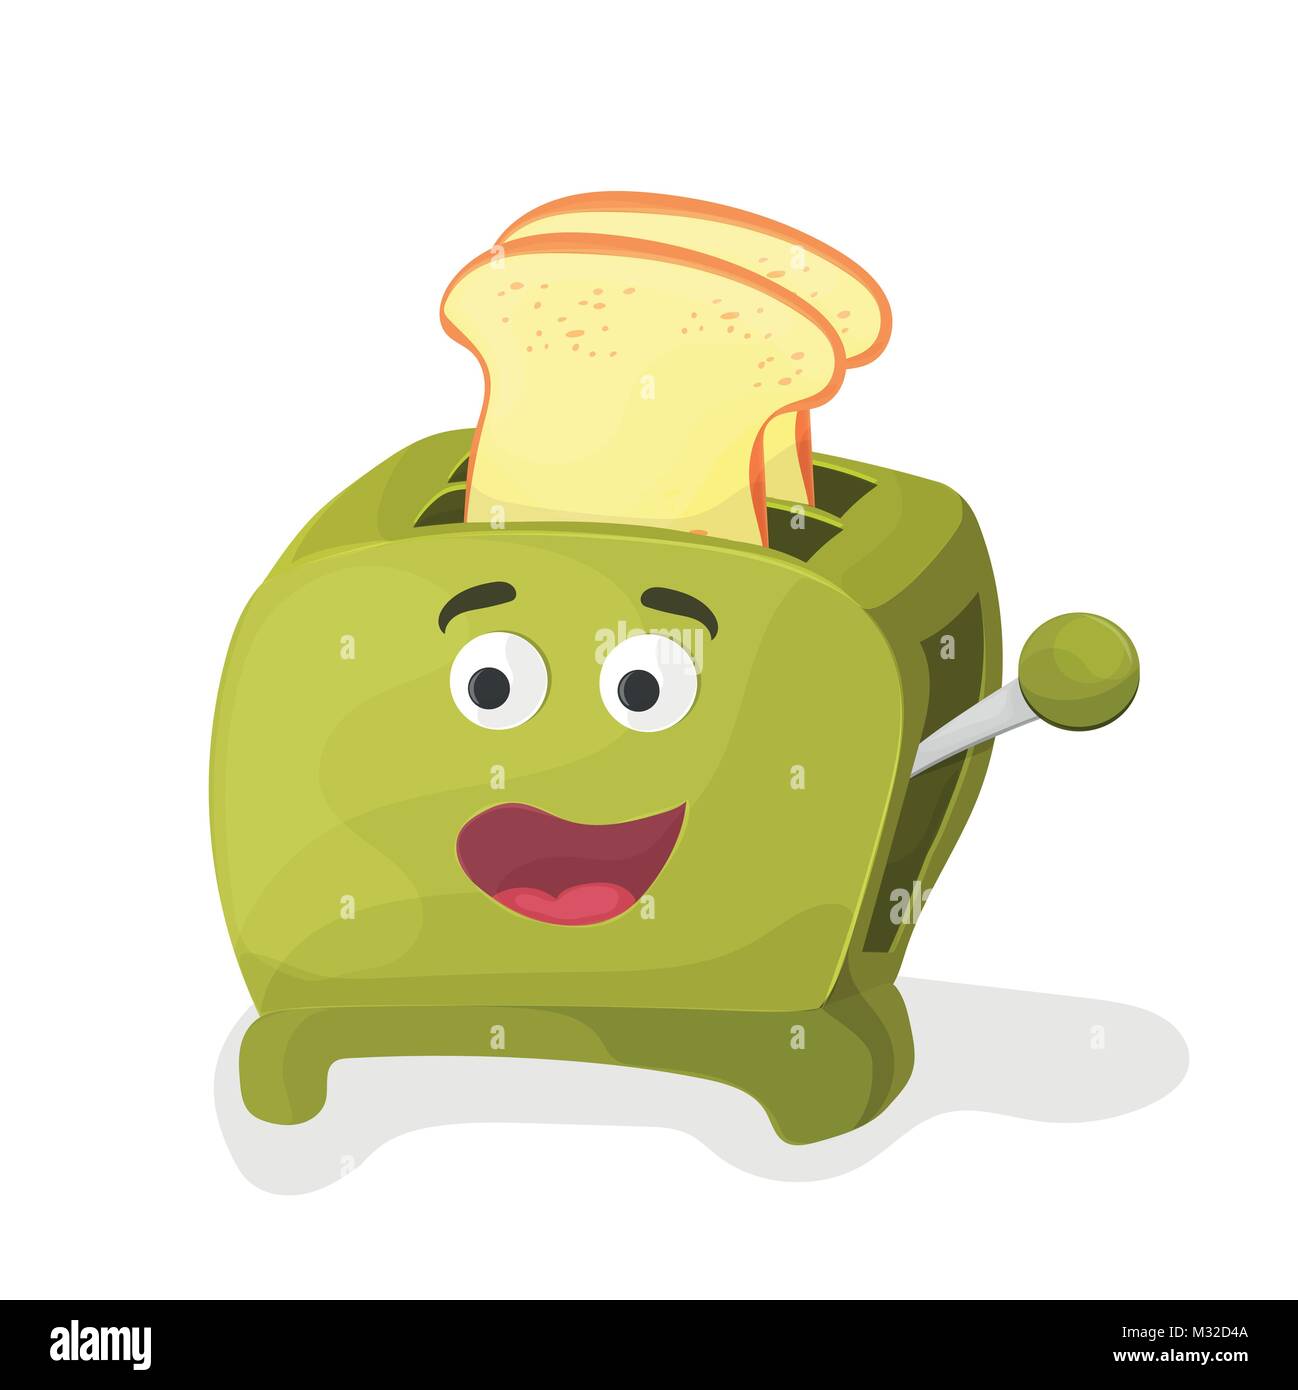 illustration of a cartoon toaster on a white background Stock Vector